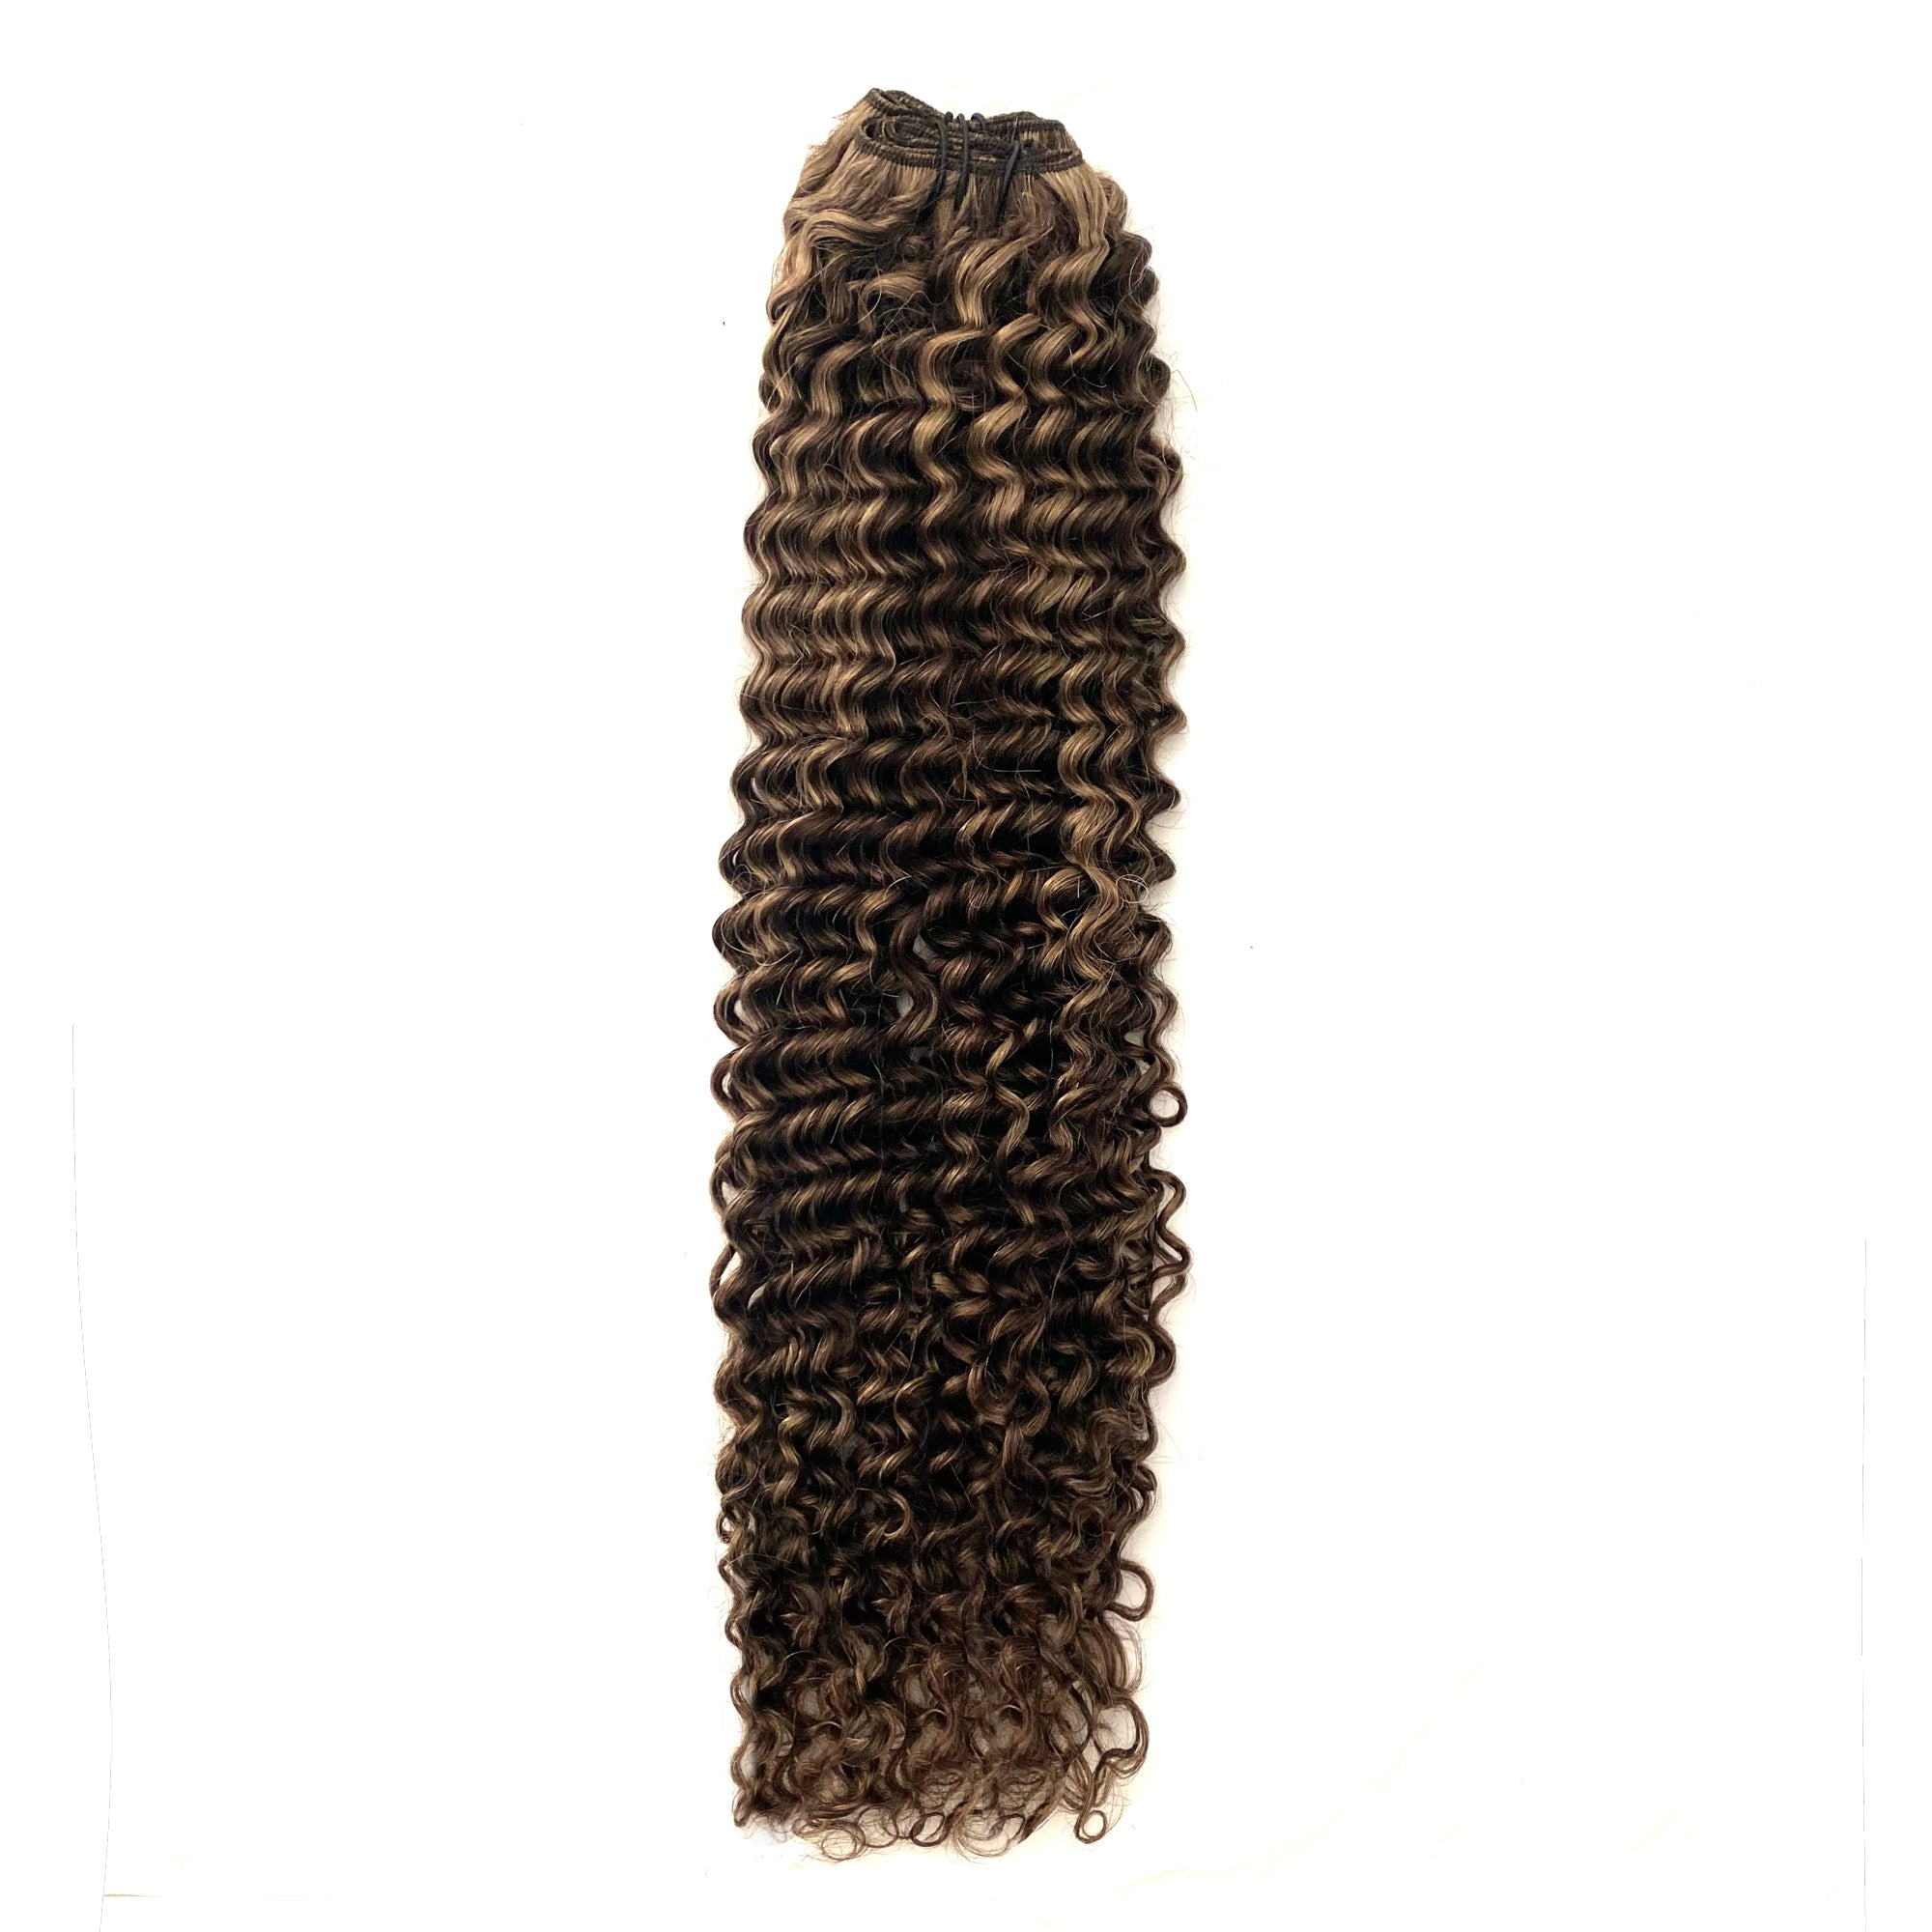 Weft Curly Hair Extensions 3C 25" - #2/16 Dark Brown and Natural Blonde Highlights